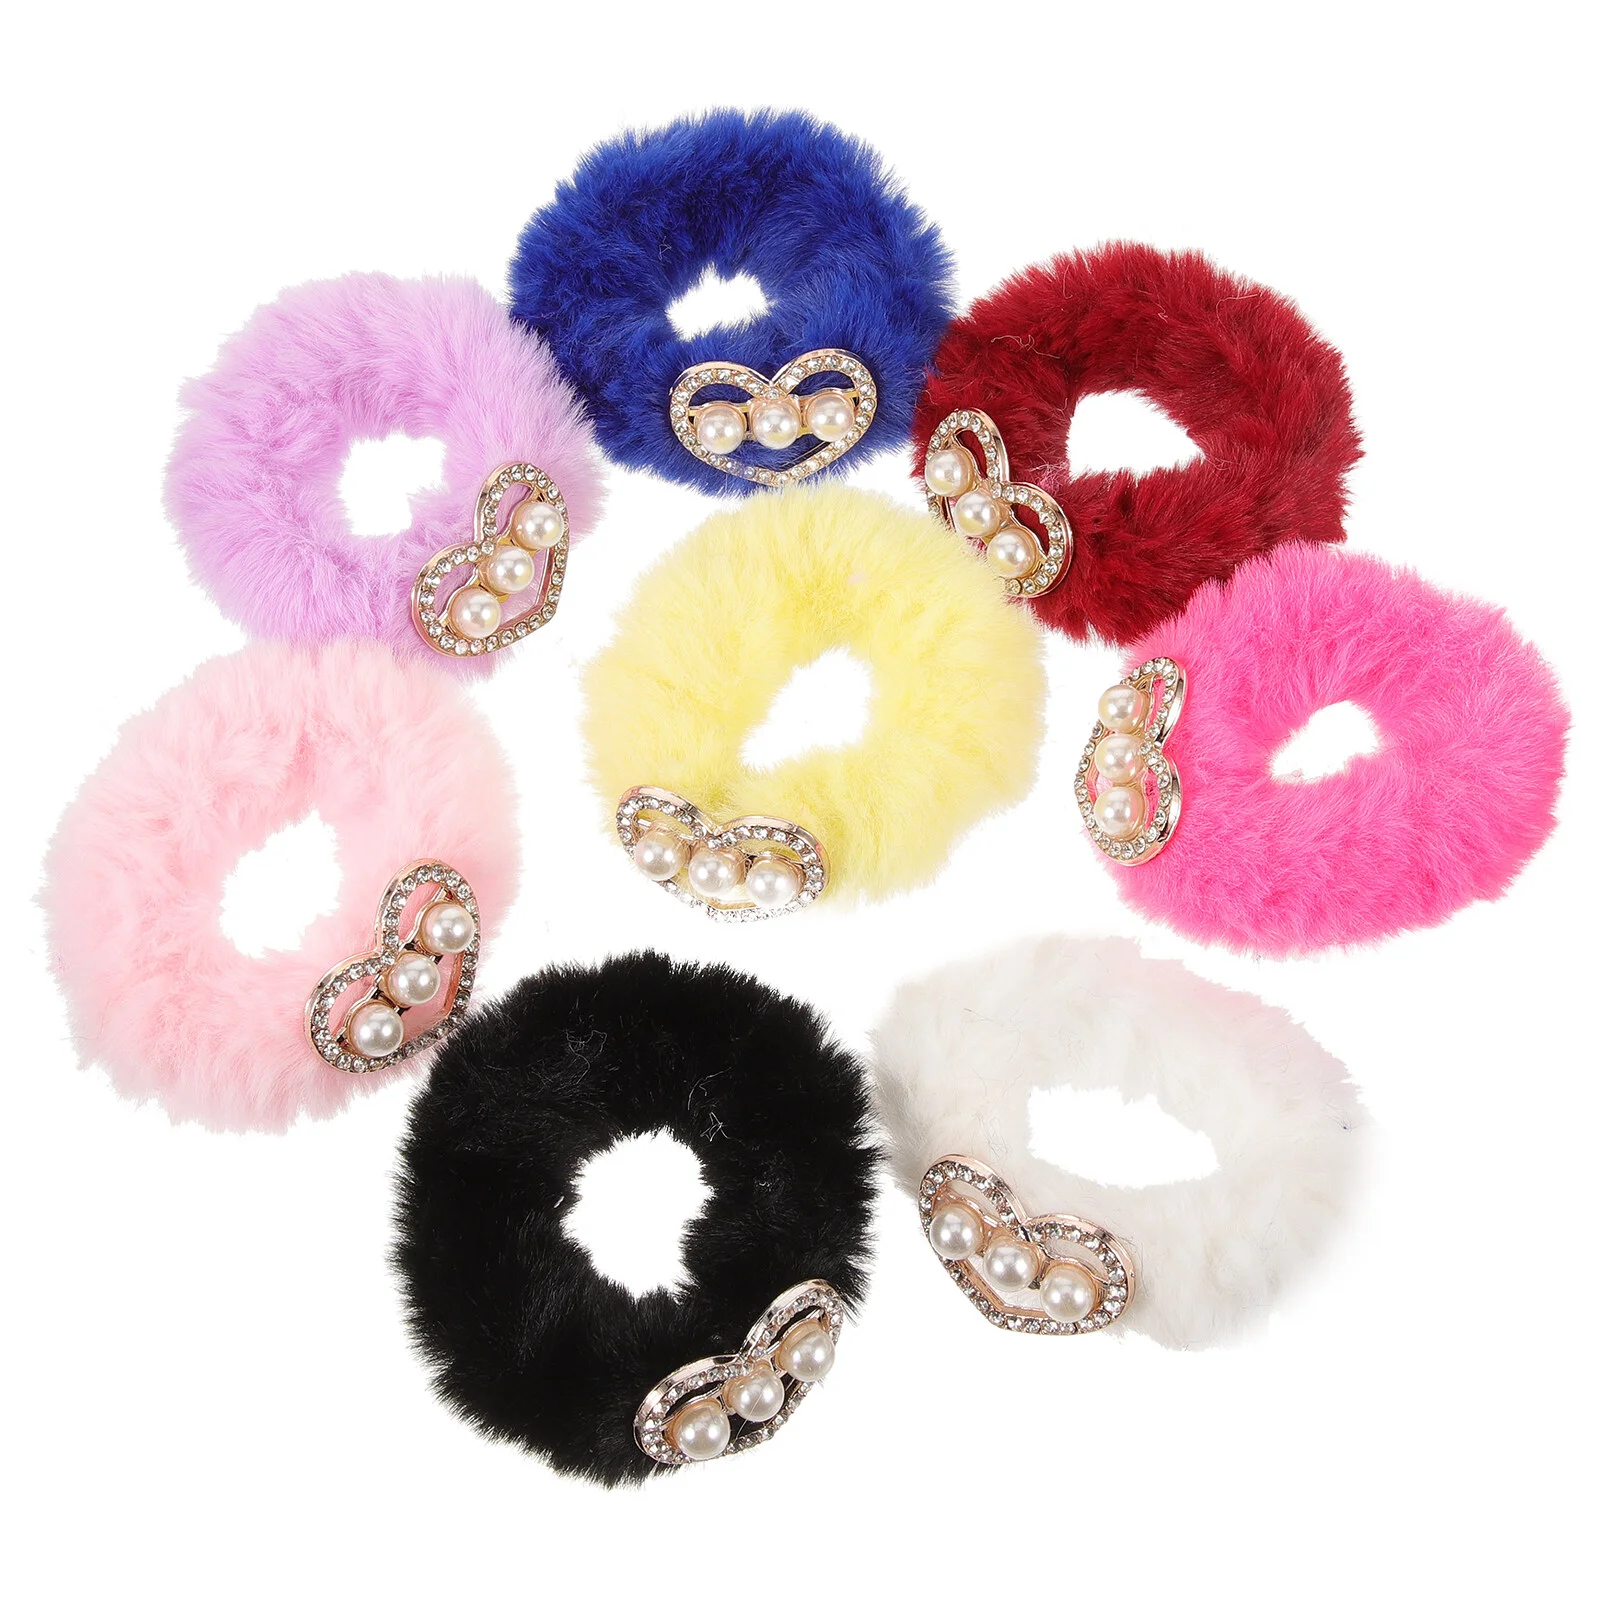 

8pcs Fluffy Hair Ties Lovely Hair Ropes Rhinestone Hair Bands Fuzzy Scrunchies for Girls